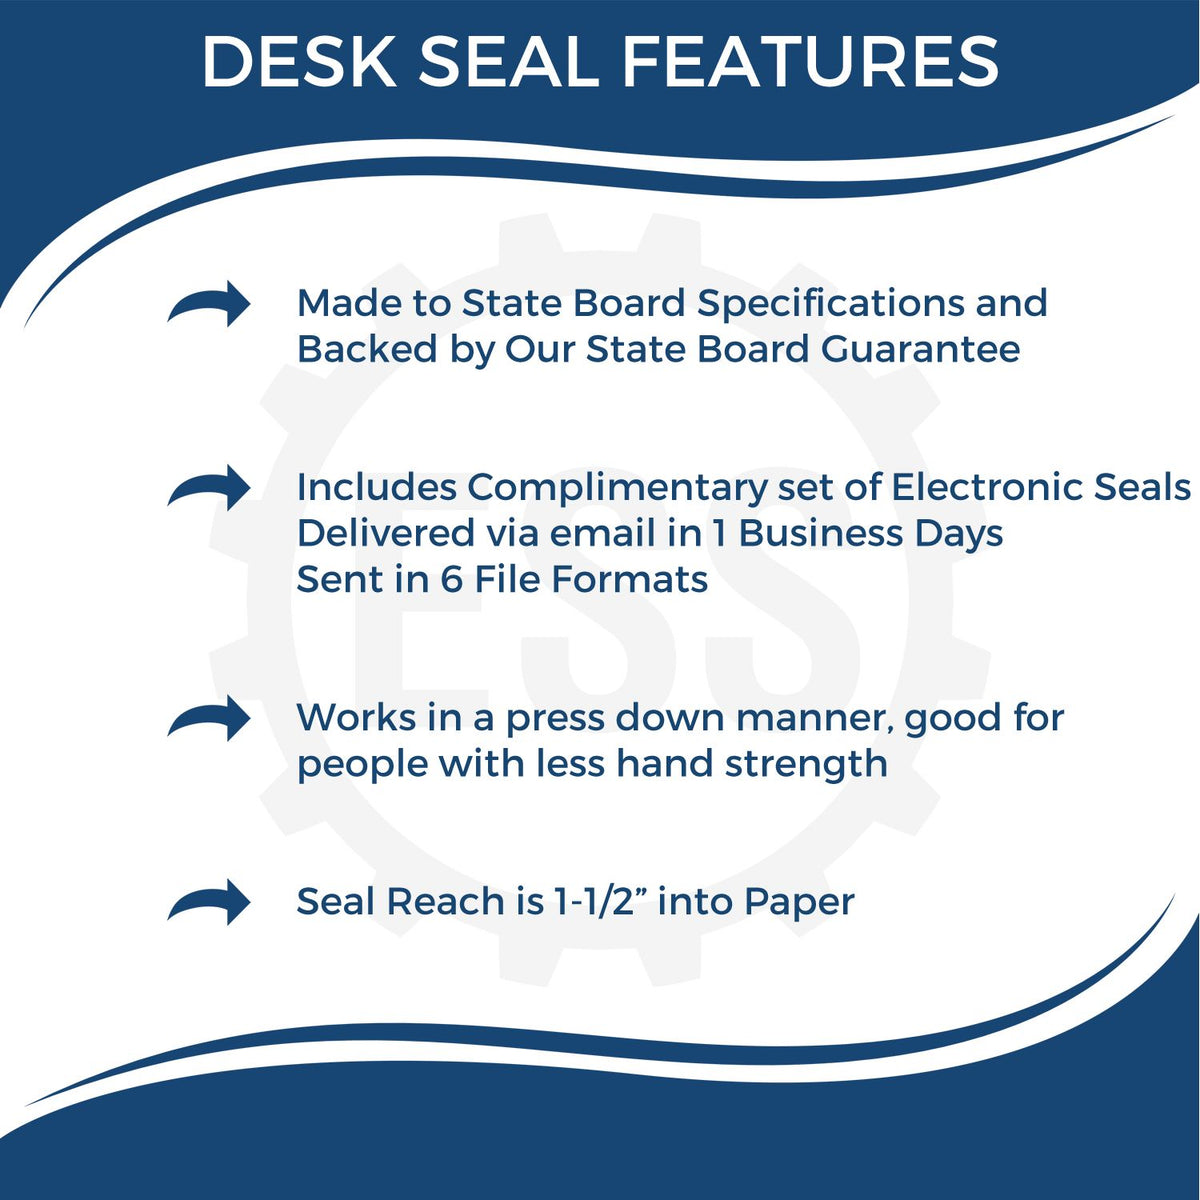 A picture of an infographic highlighting the selling points for the Vermont Desk Architect Embossing Seal